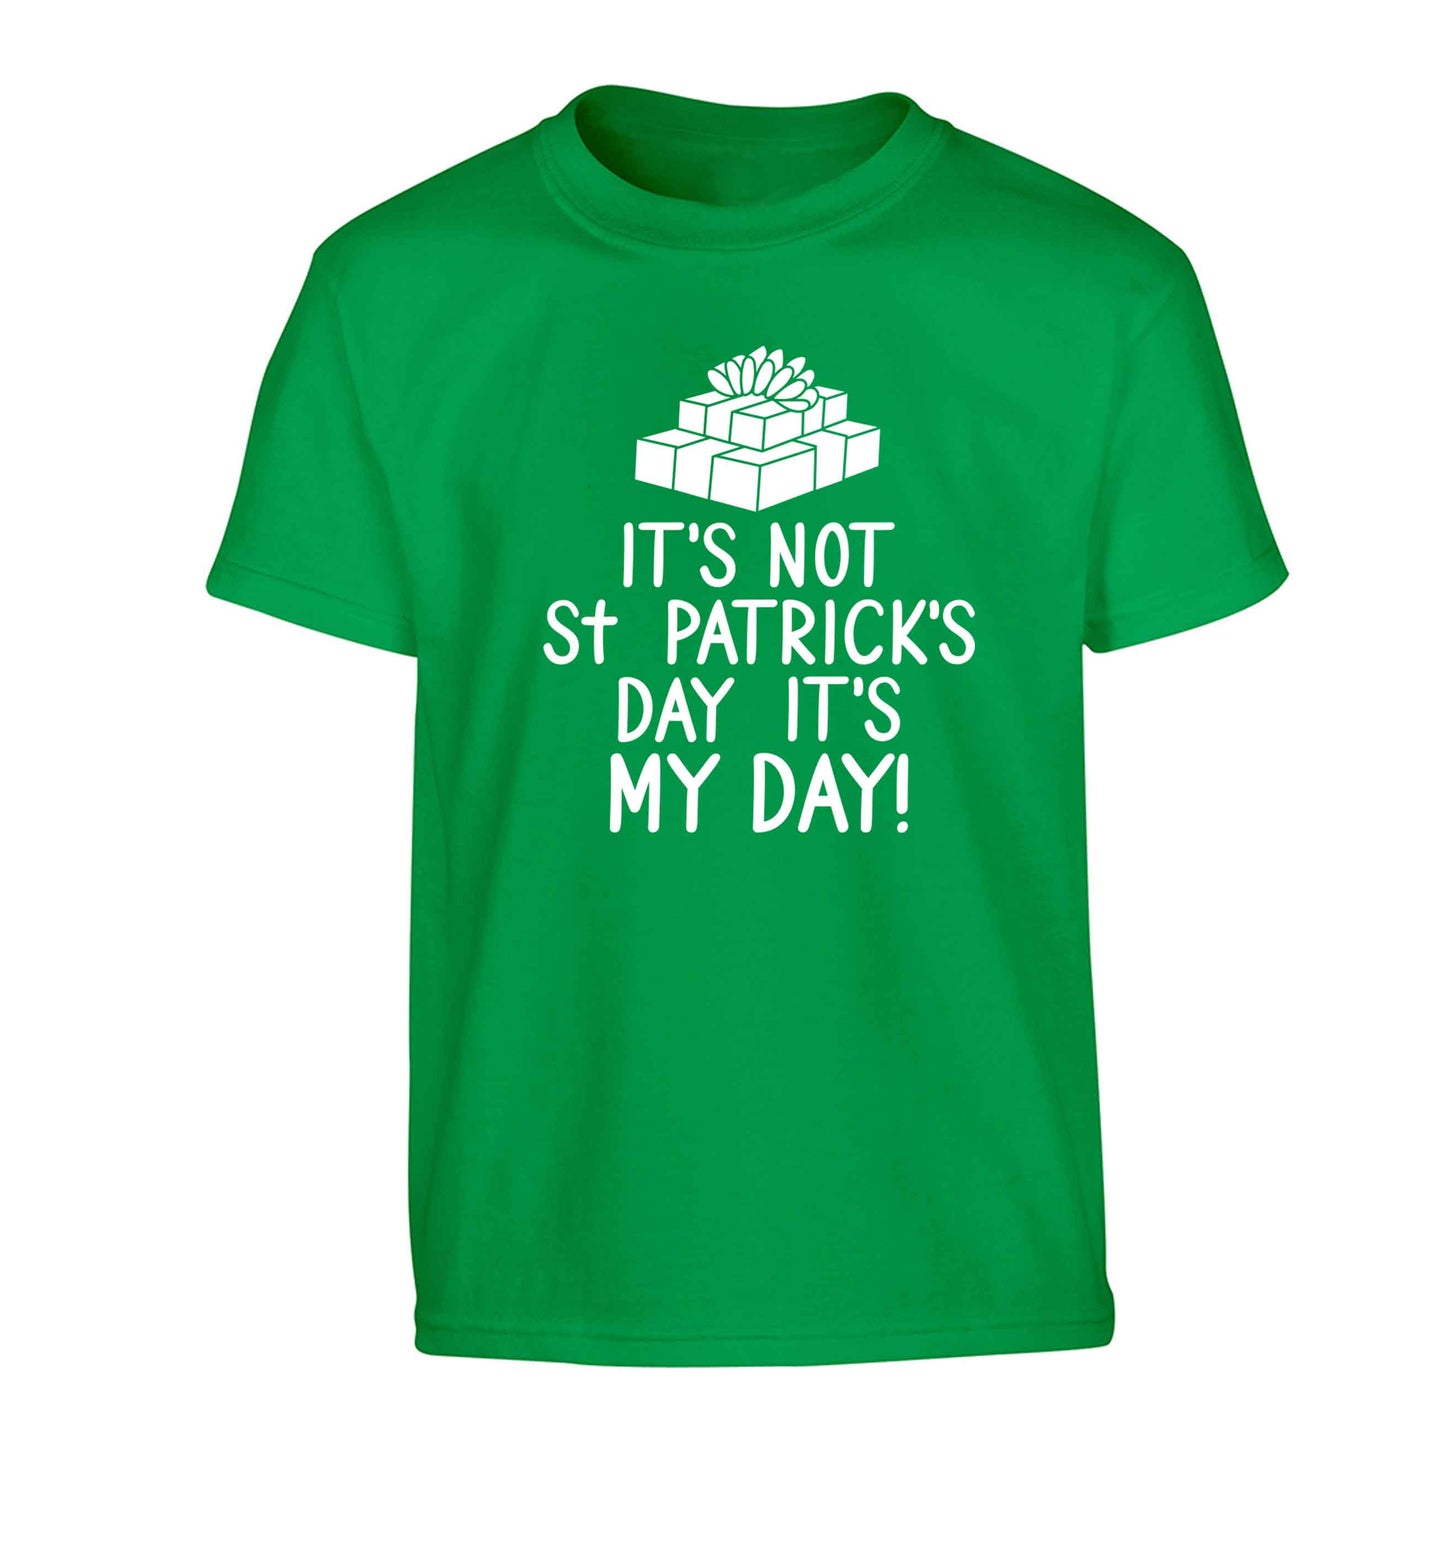 Funny gifts for your mum on mother's dayor her birthday! It's not St Patricks day it's my day Children's green Tshirt 12-13 Years